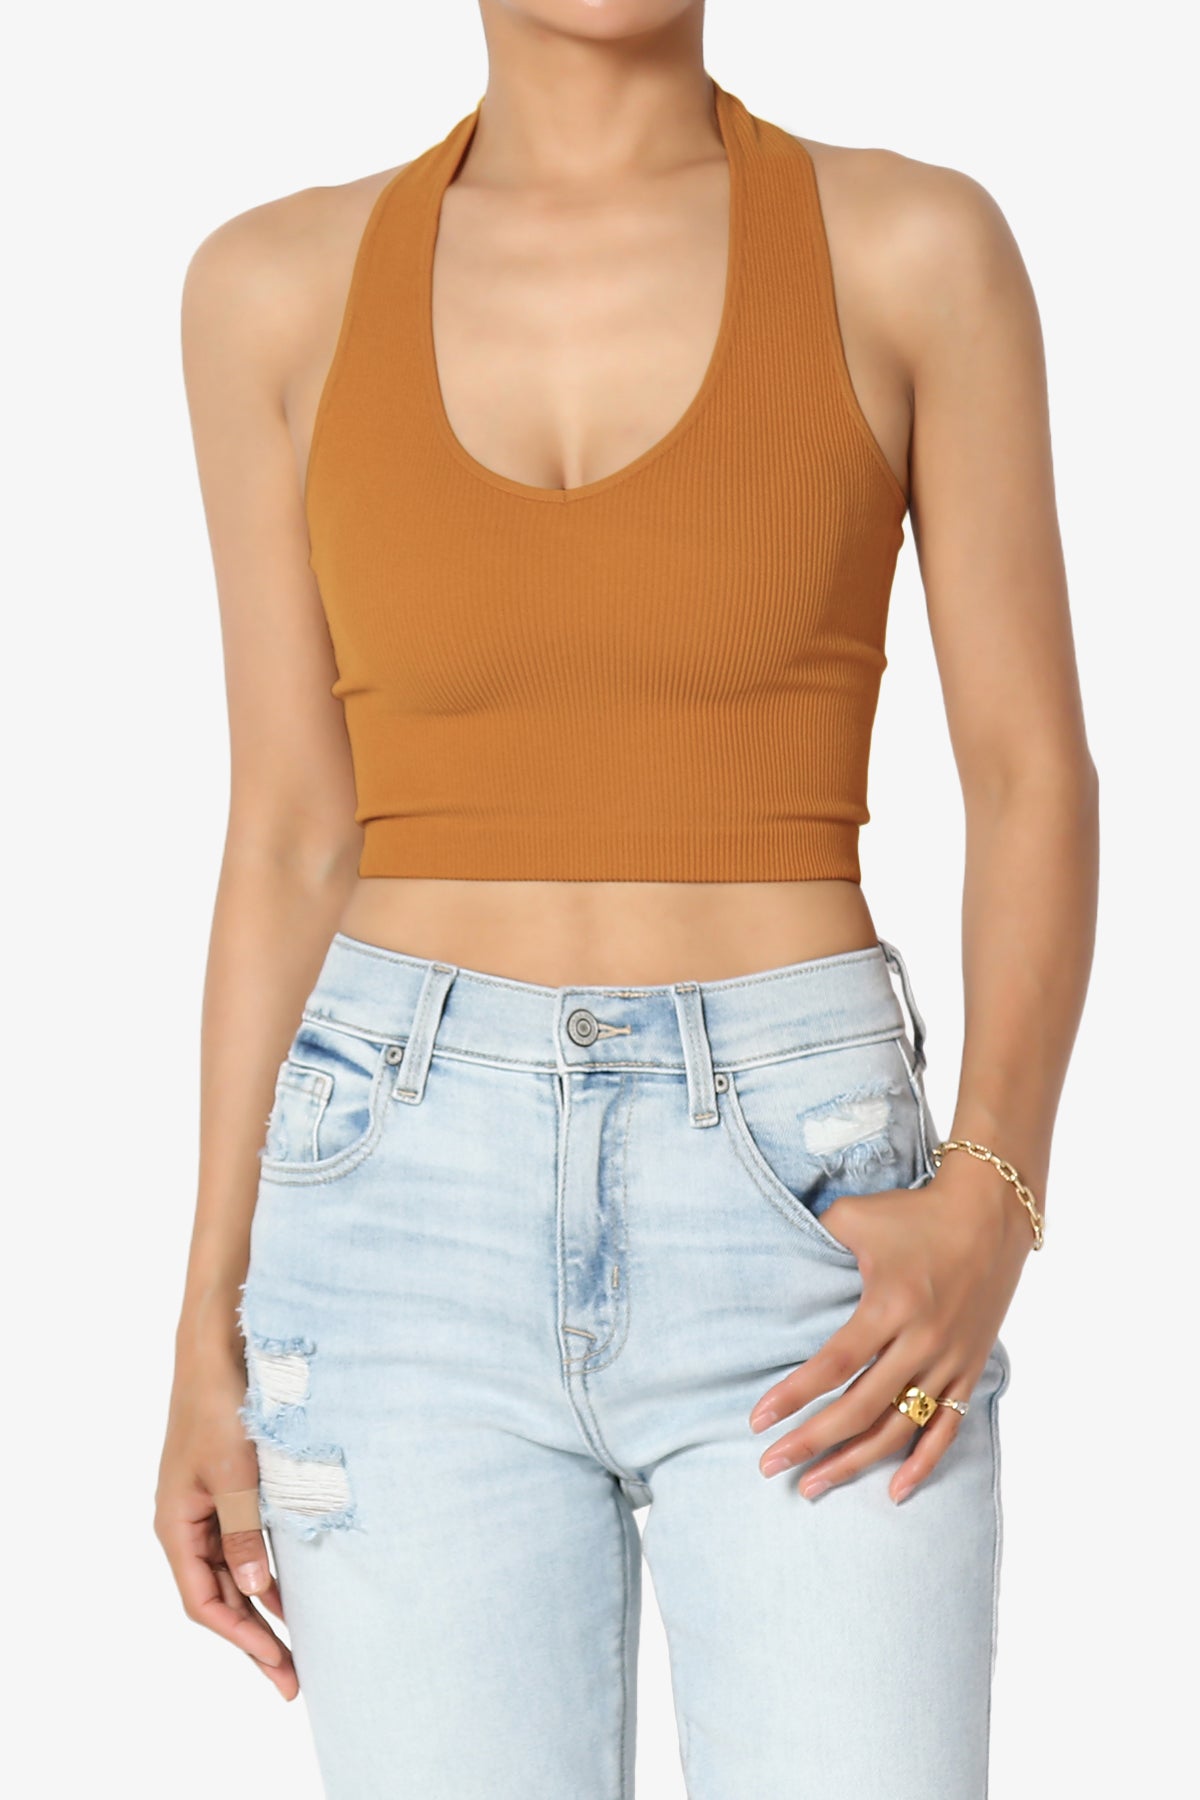 Ribbed Seamless Double Strap Cami Tank Crop Top Body Hugging